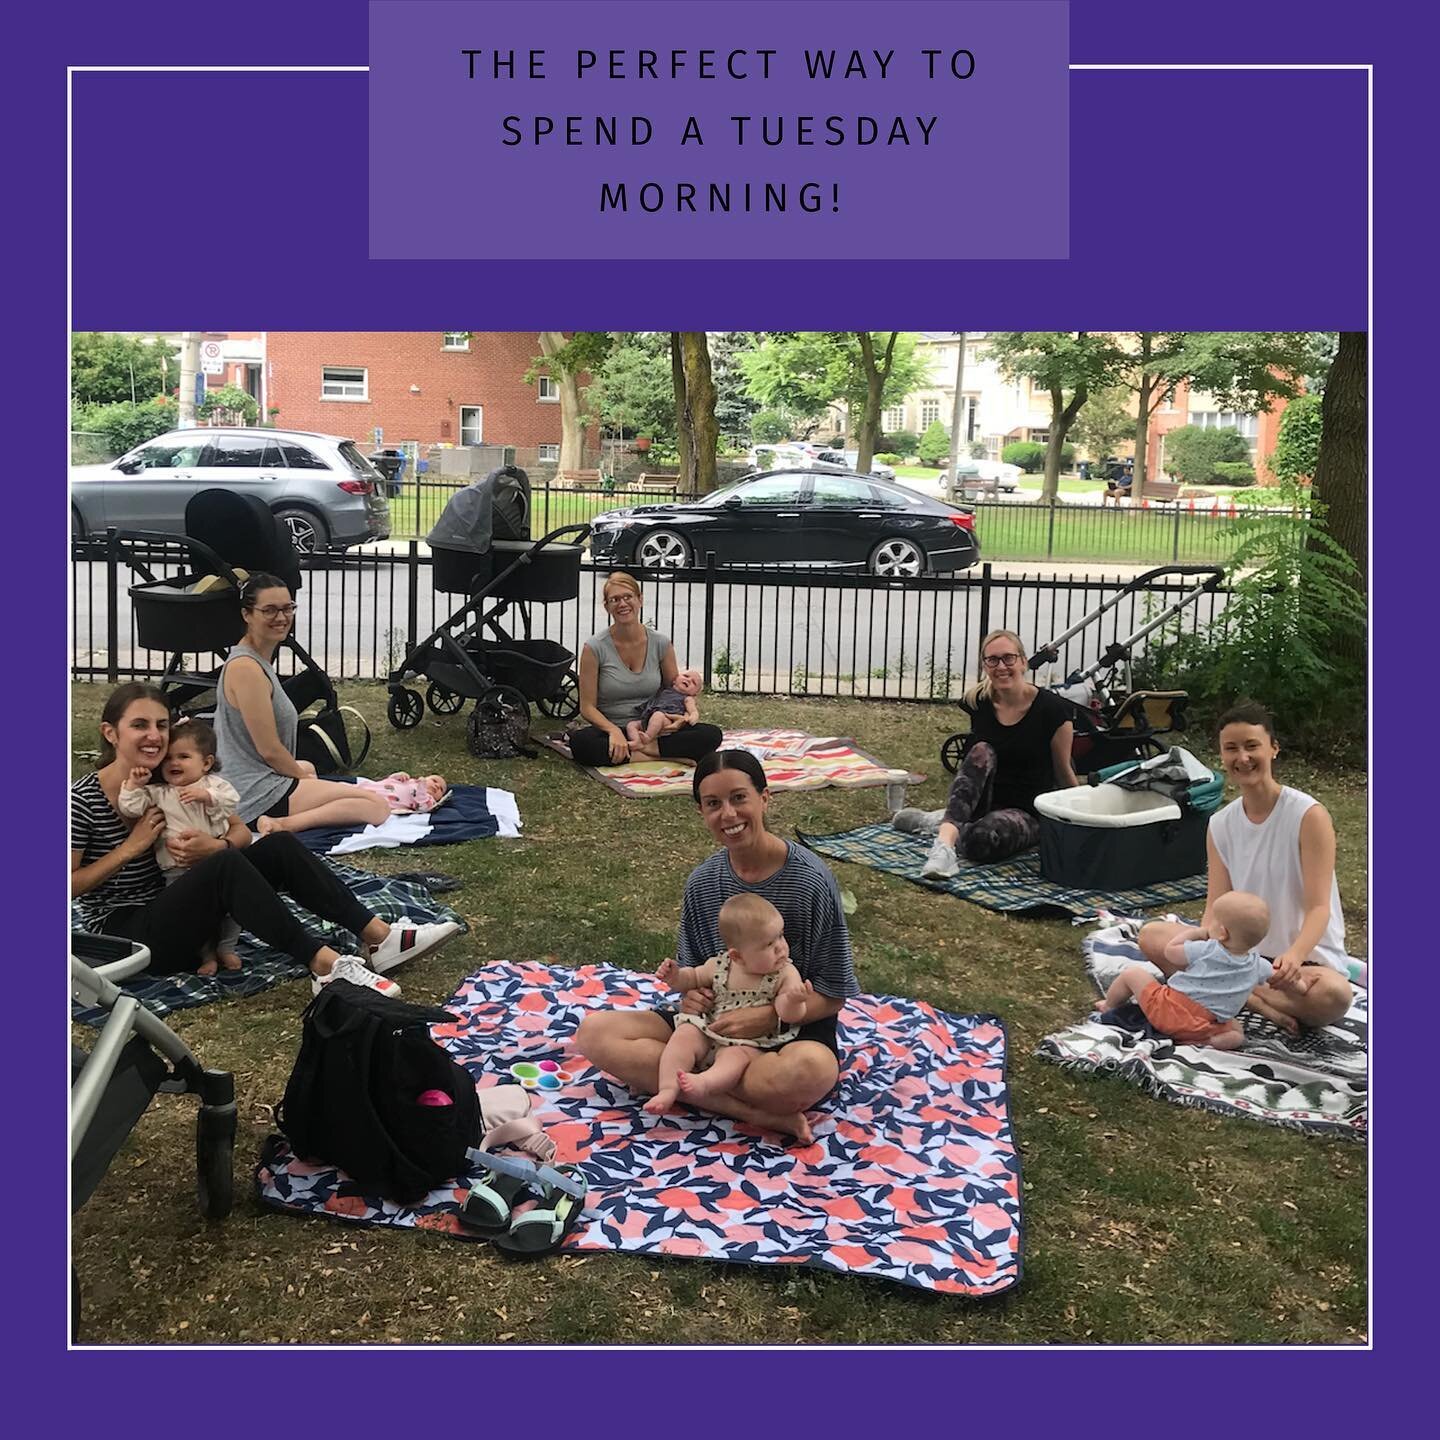 What a great way to spend a Tuesday Morning! Come and join us every Tuesday morning whilst the sun is shining for a catch up whilst the kids play. Have a look on our website for more membership info and meet up times (link in bio) #ntmoms #torontomom